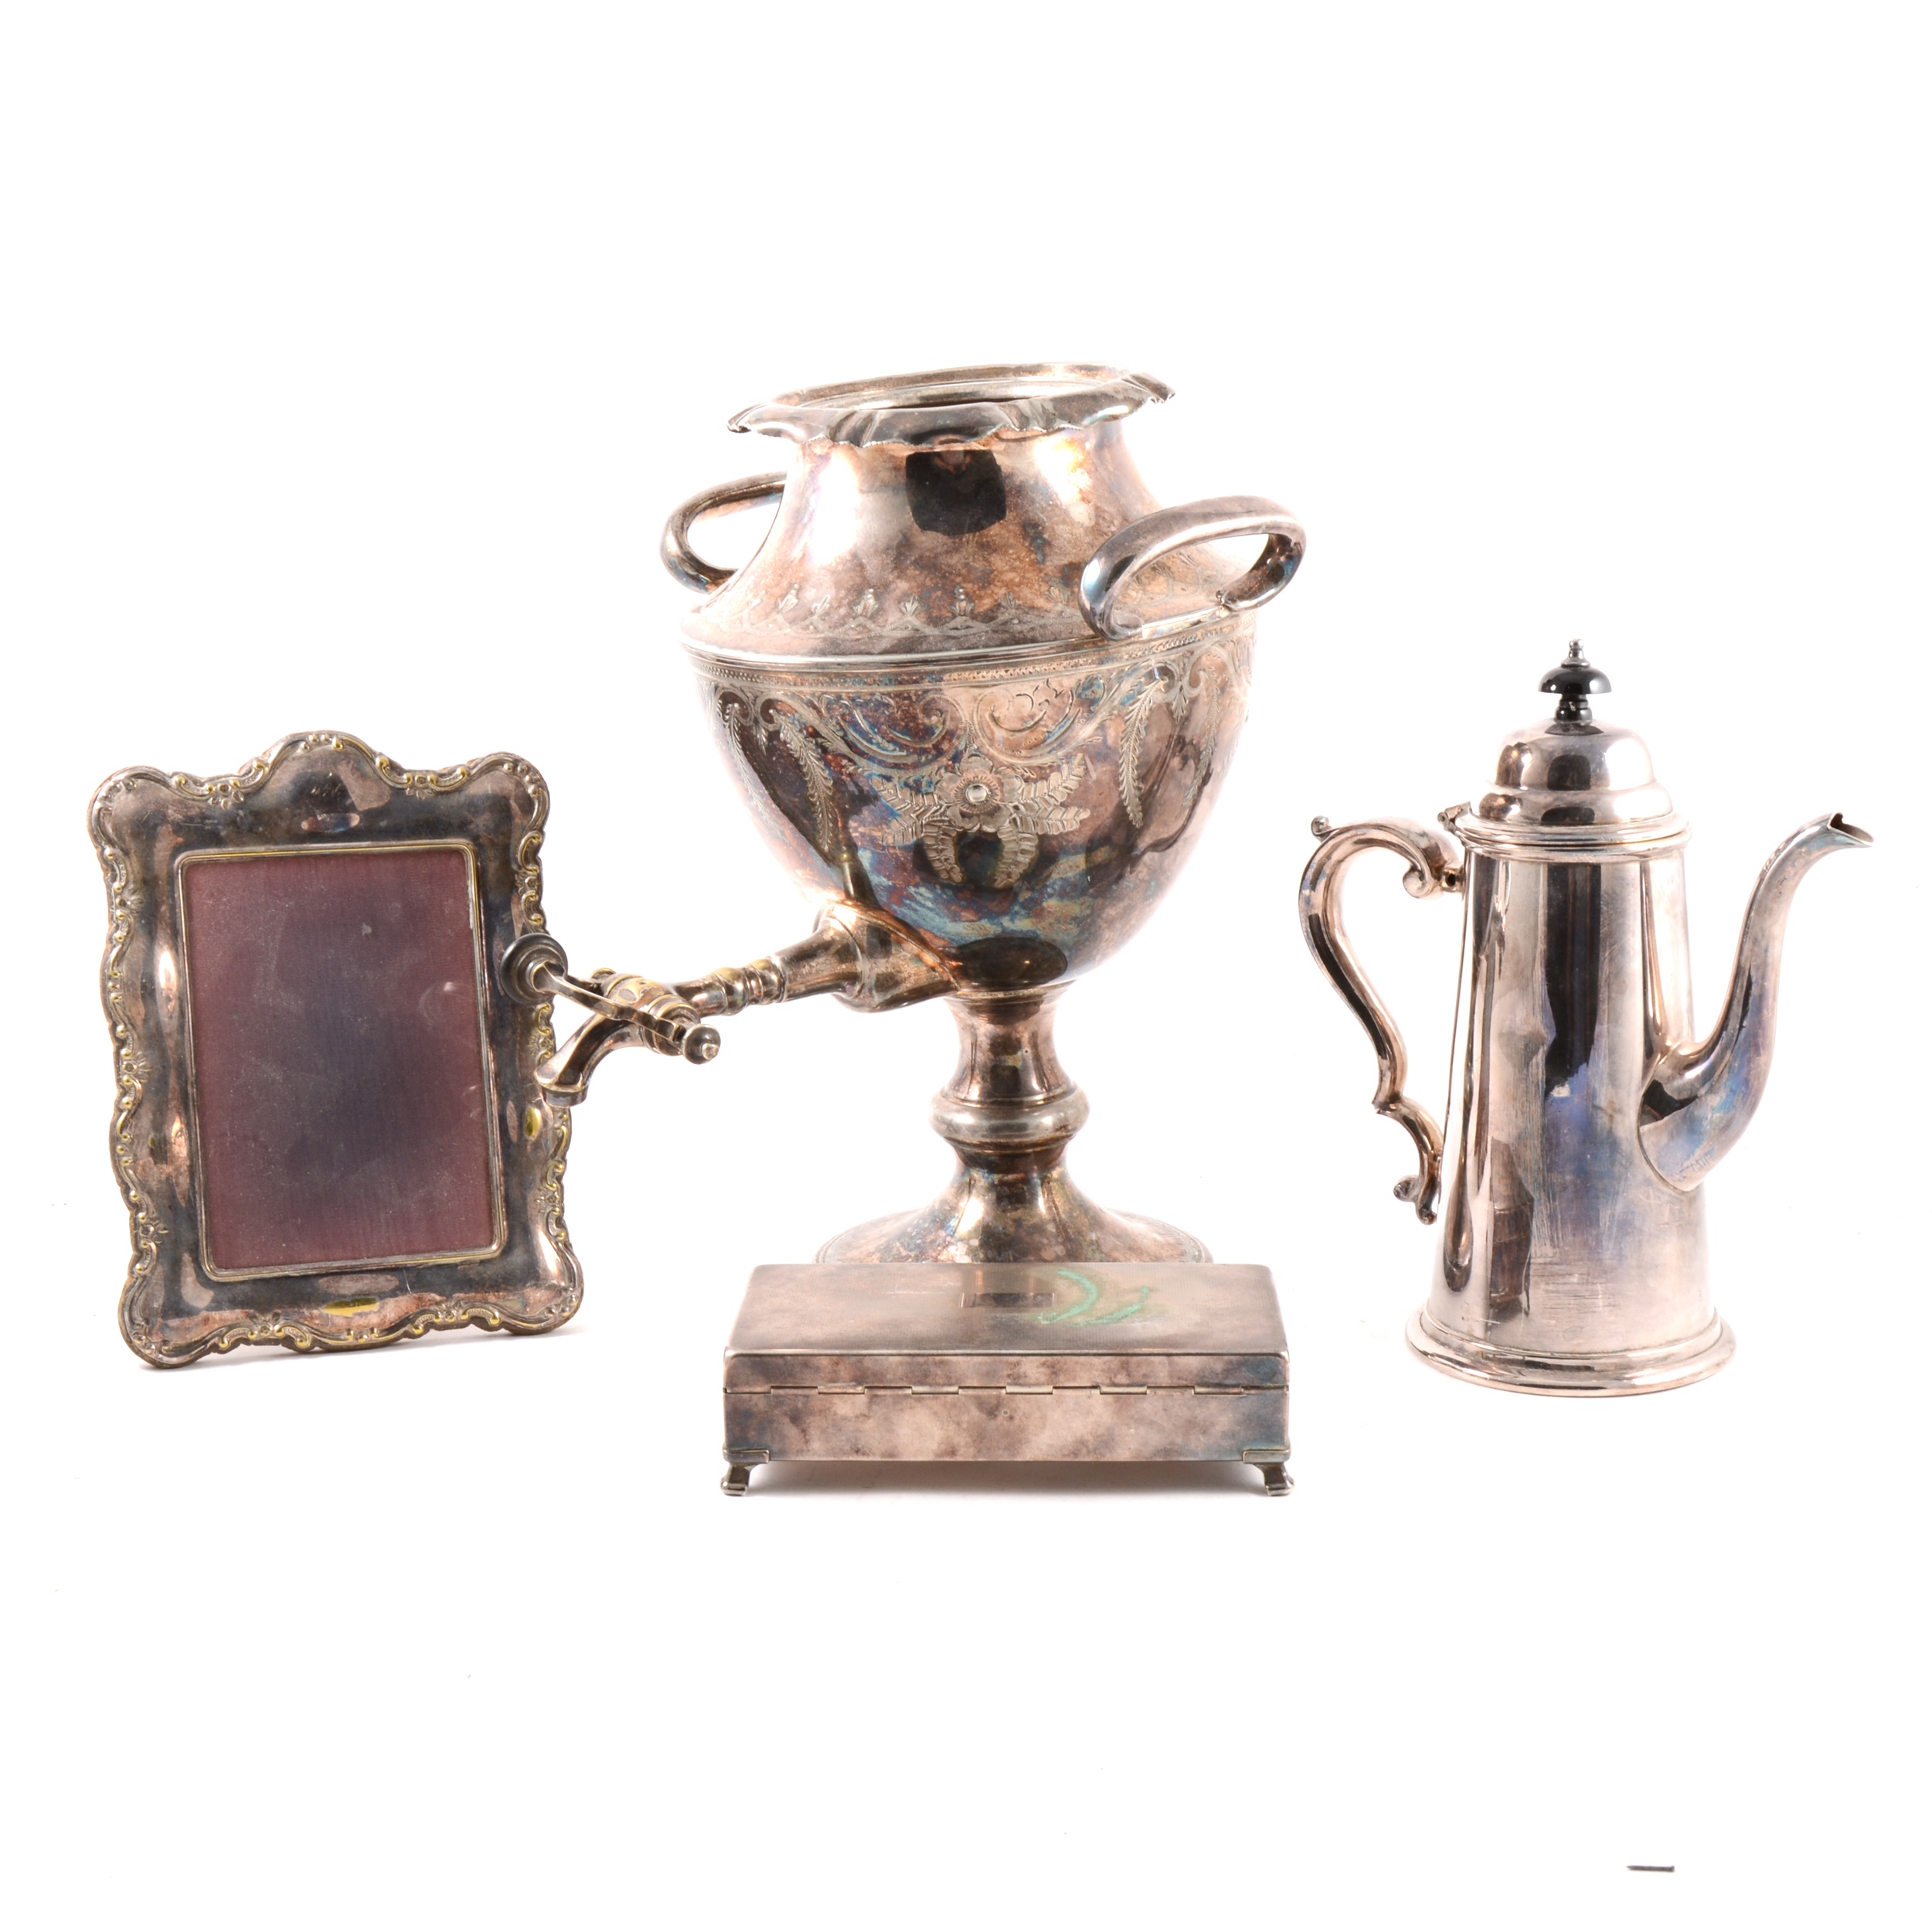 A collection of ceramics and plated wares, to include a tea urn, salver, salts, cigar box